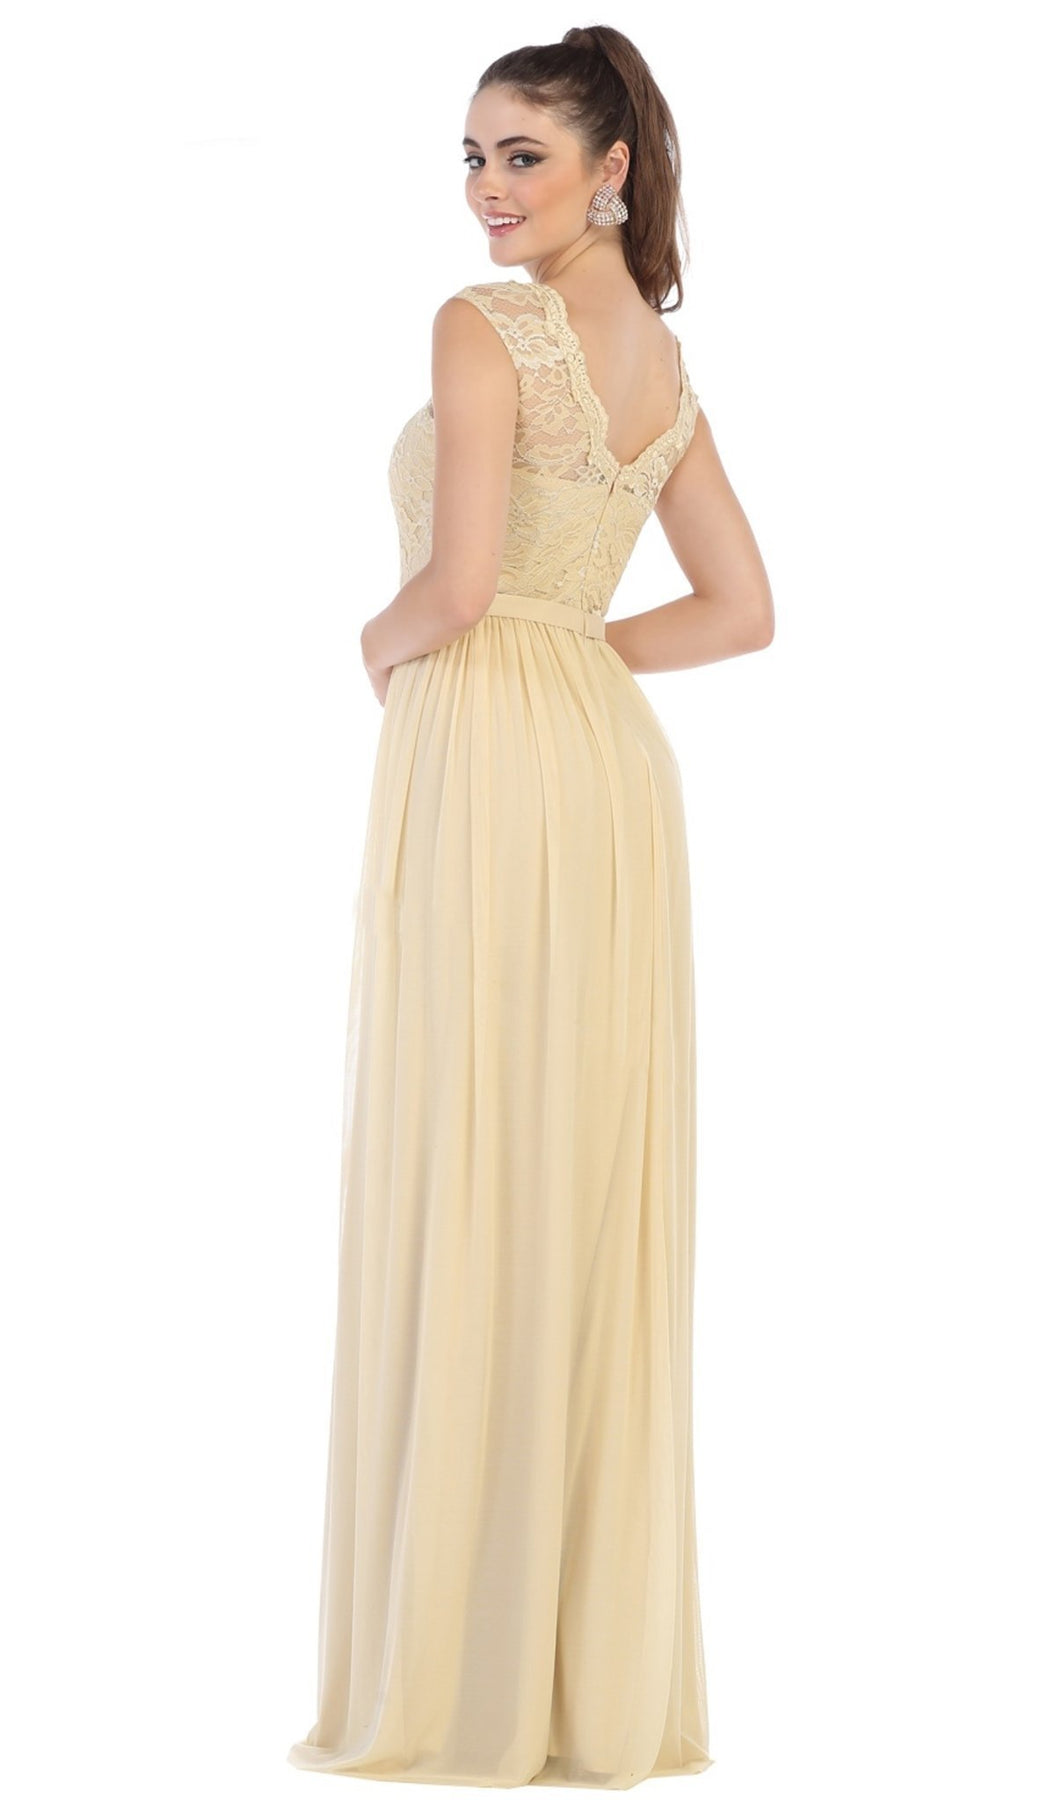 May Queen - Lace Cap Sleeve Bateau A-line Dress MQ1590  In Neutral